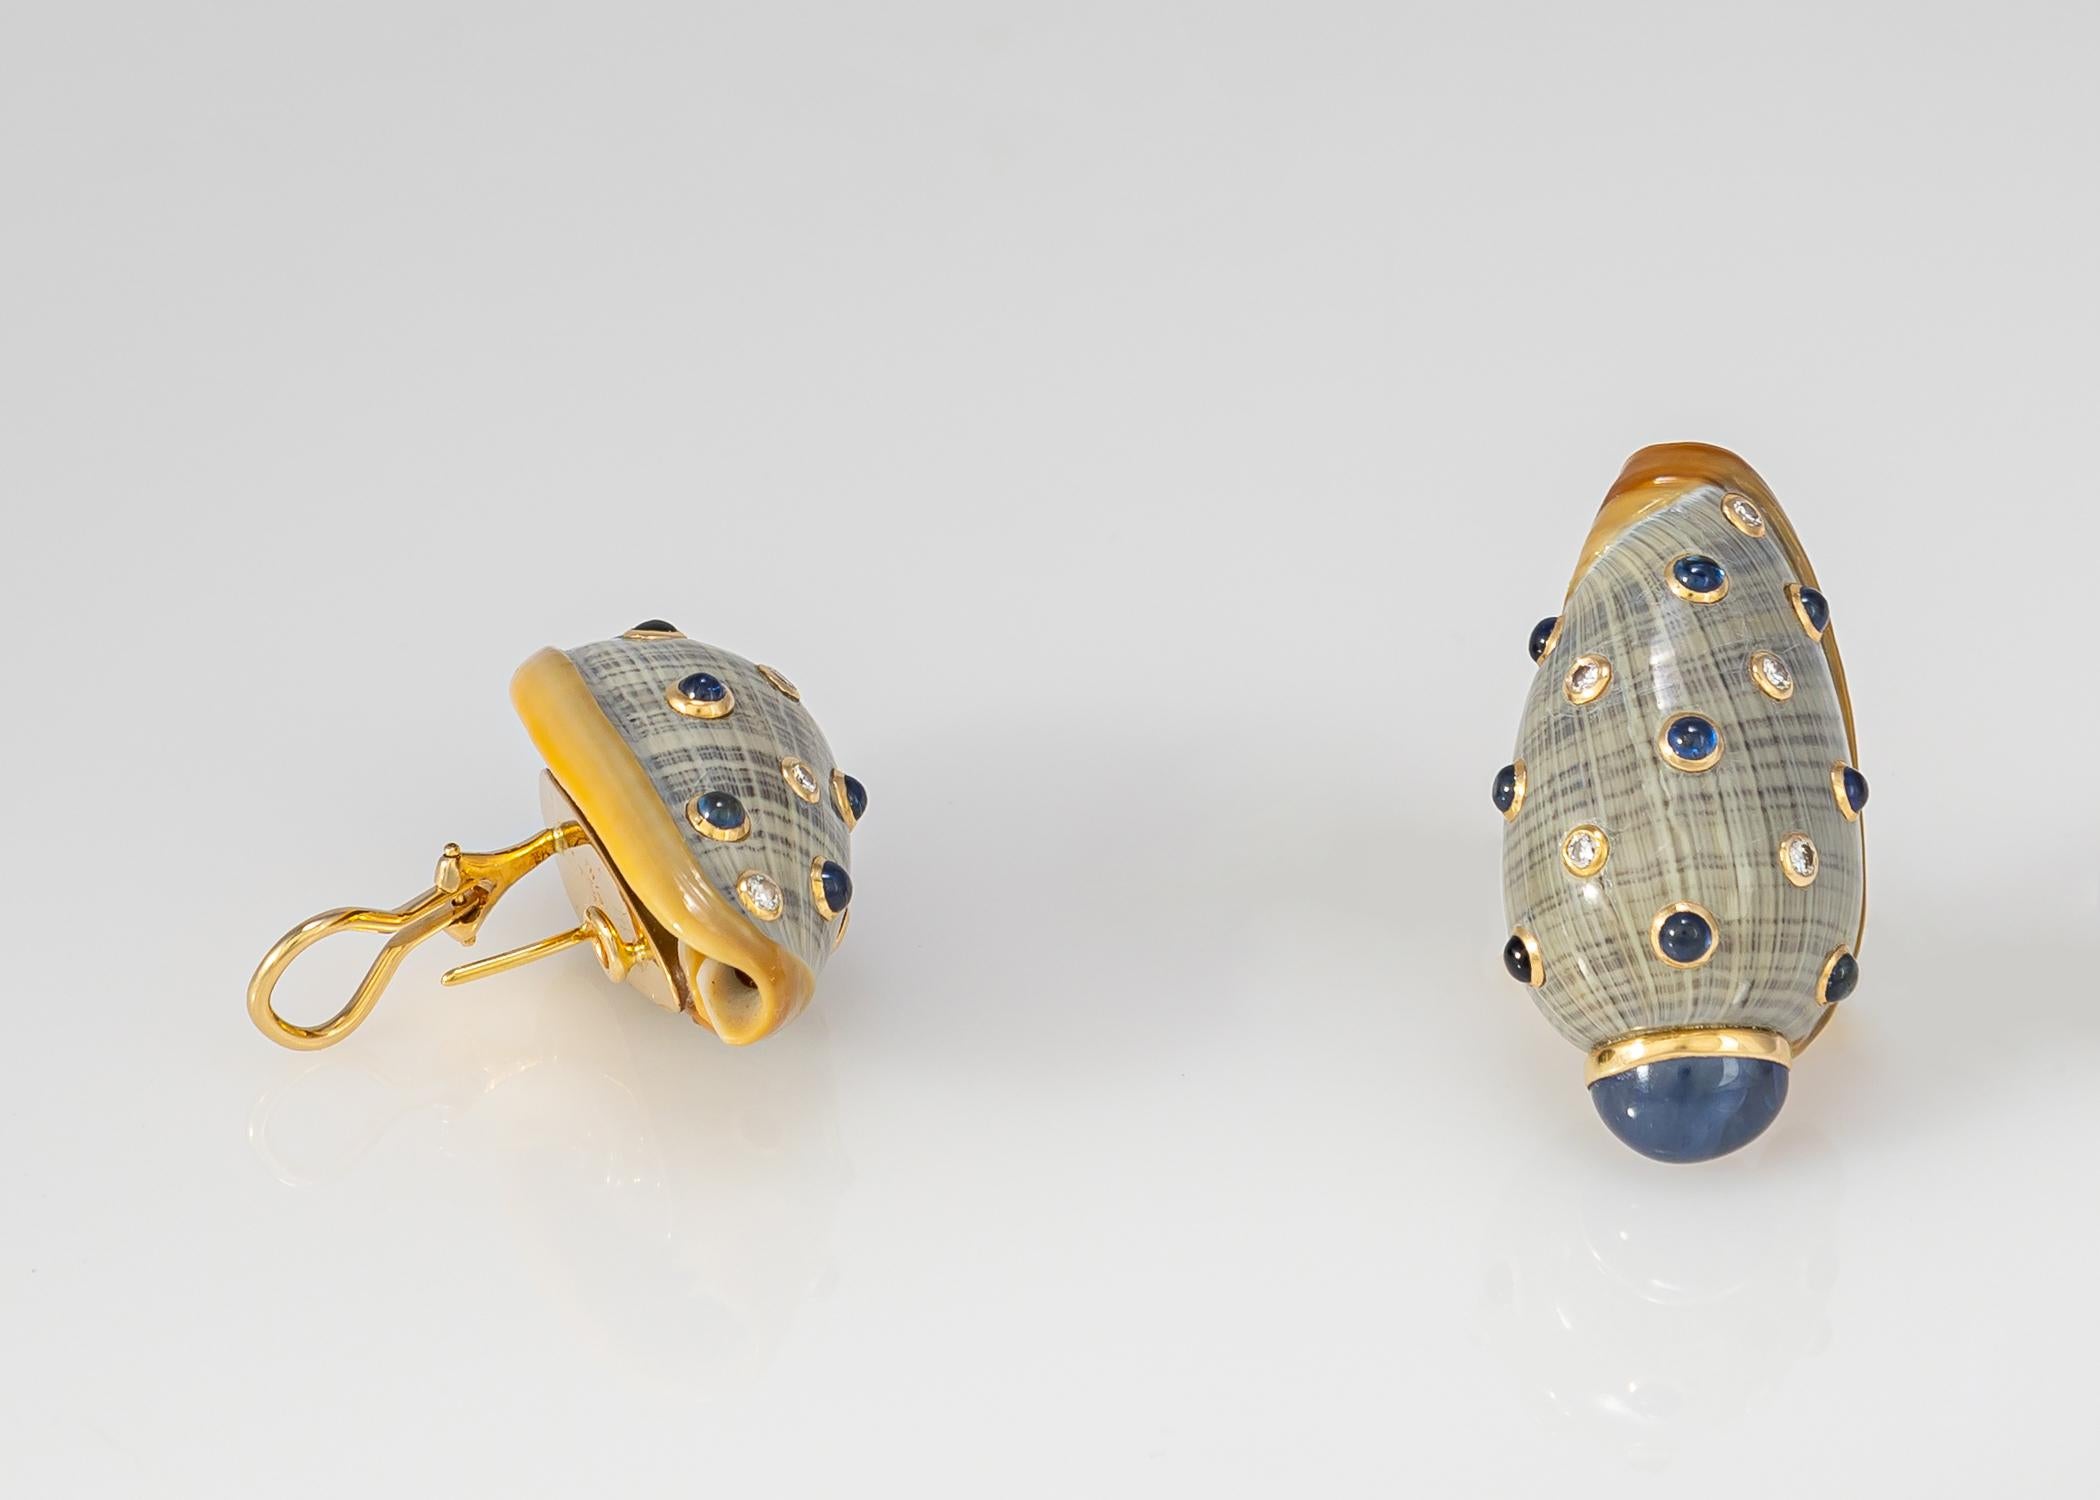 Trianon is famous for using natural shells to create unique earrings. This design has a matched pair of cabochon sapphires capping the lower end and is further accented with sapphires and diamonds. The color of the shells creates an opportunity to